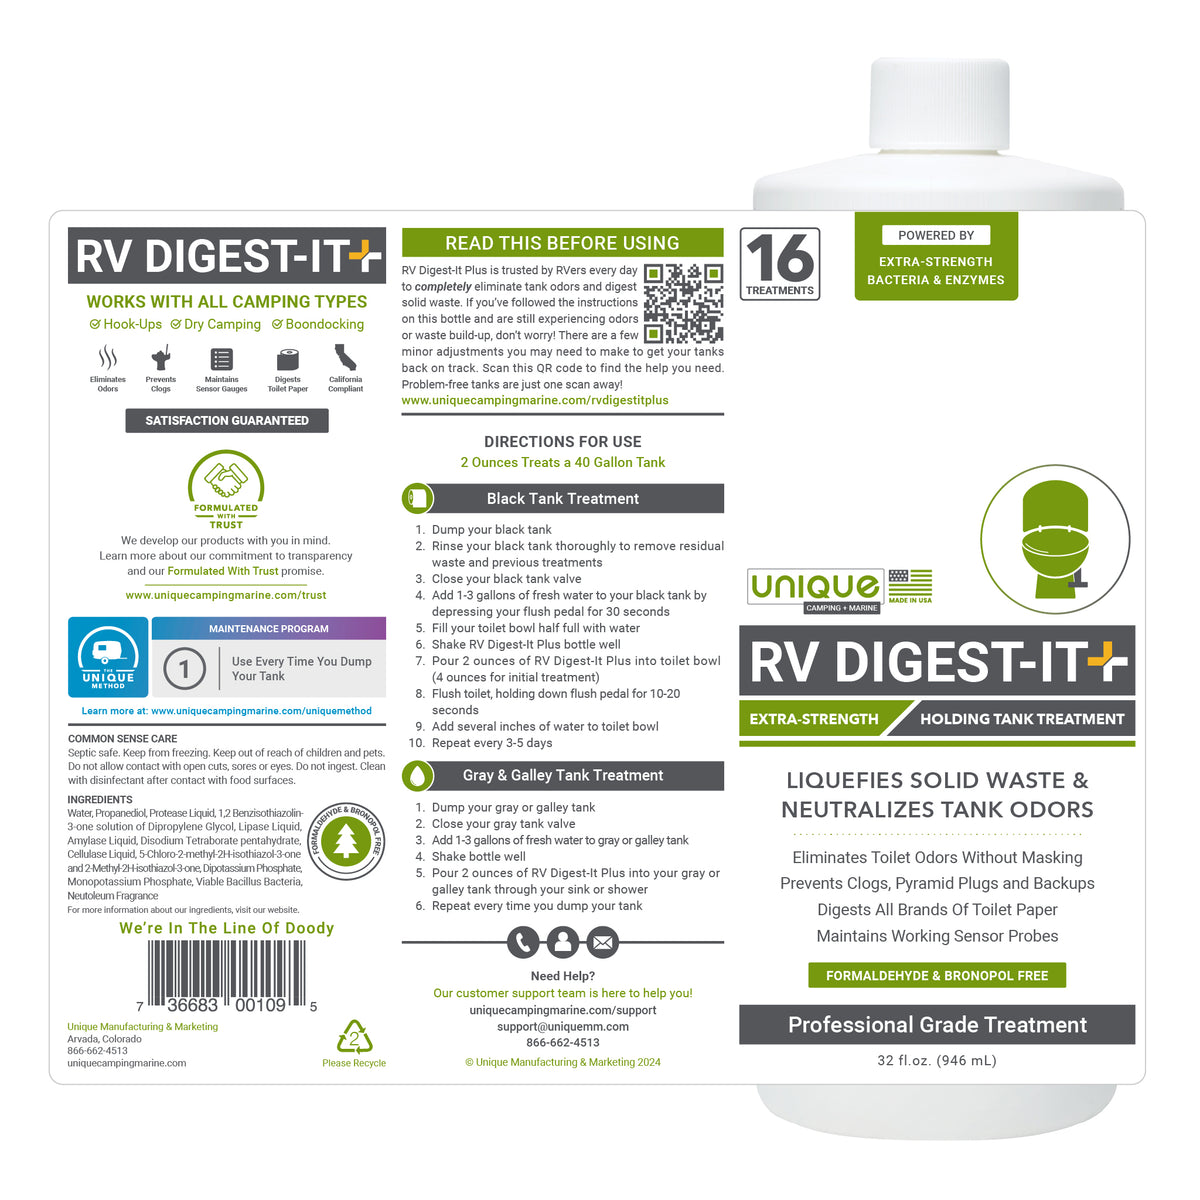 RV Digest-It+ Full label instructions and information.